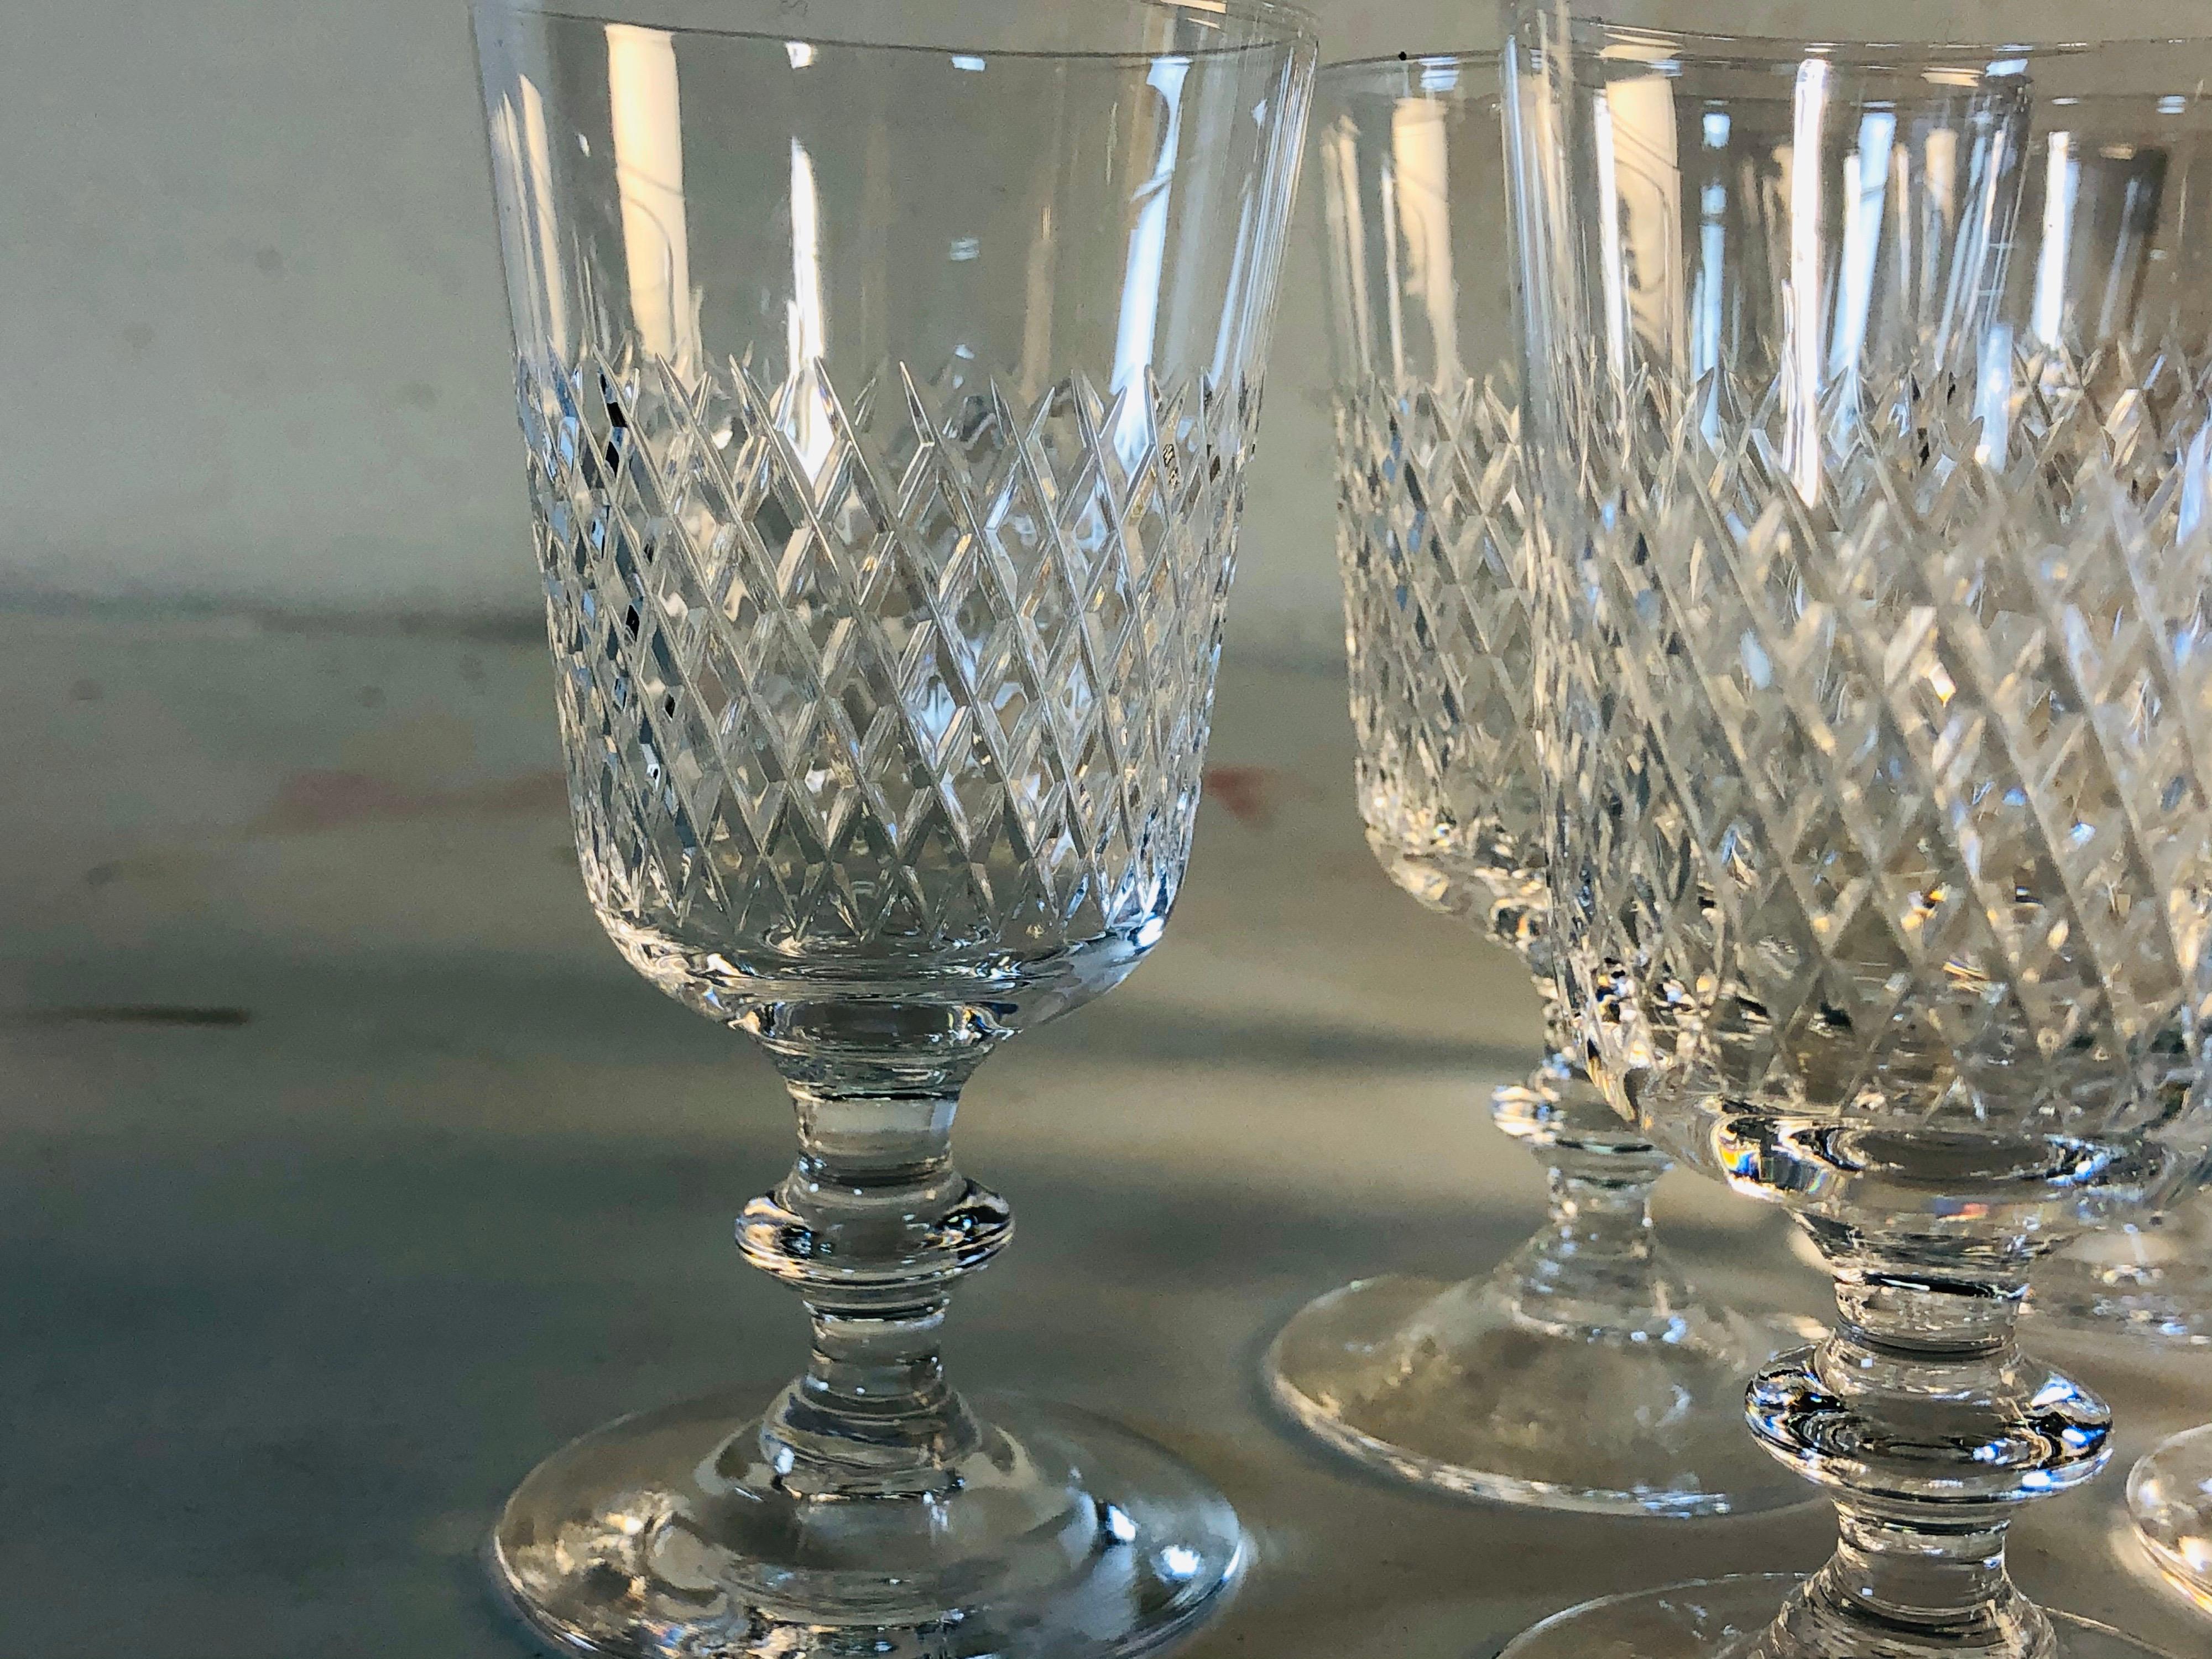 Kosta Boda Wheel-Cut Small Liquor Glass Stems, Set of 10 In Good Condition For Sale In Amherst, NH